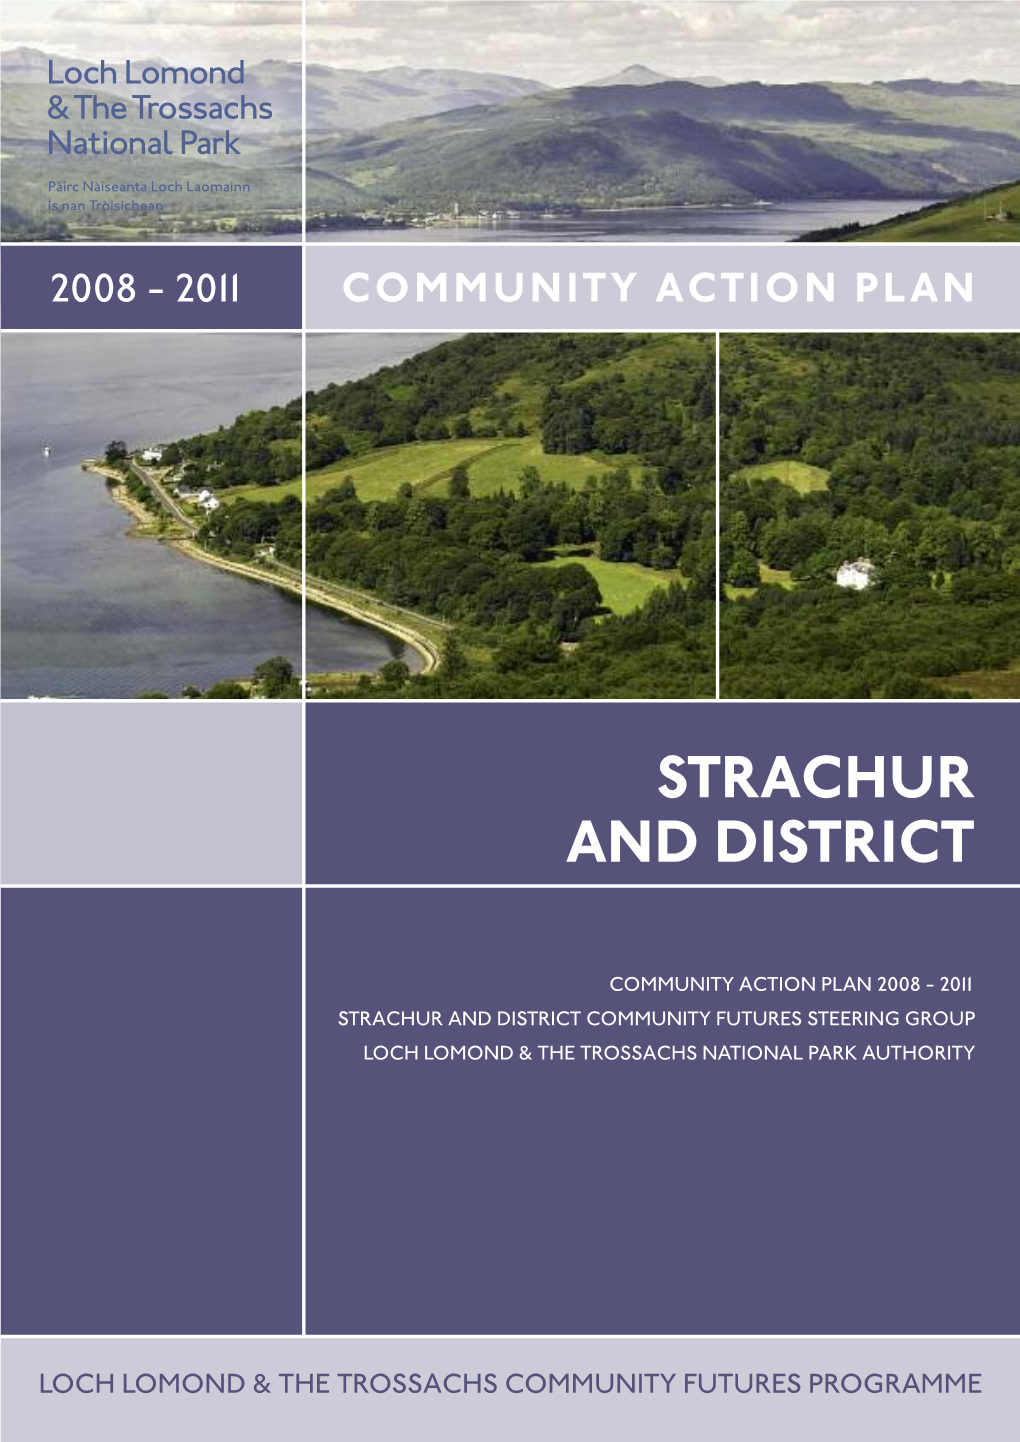 Strachur and District